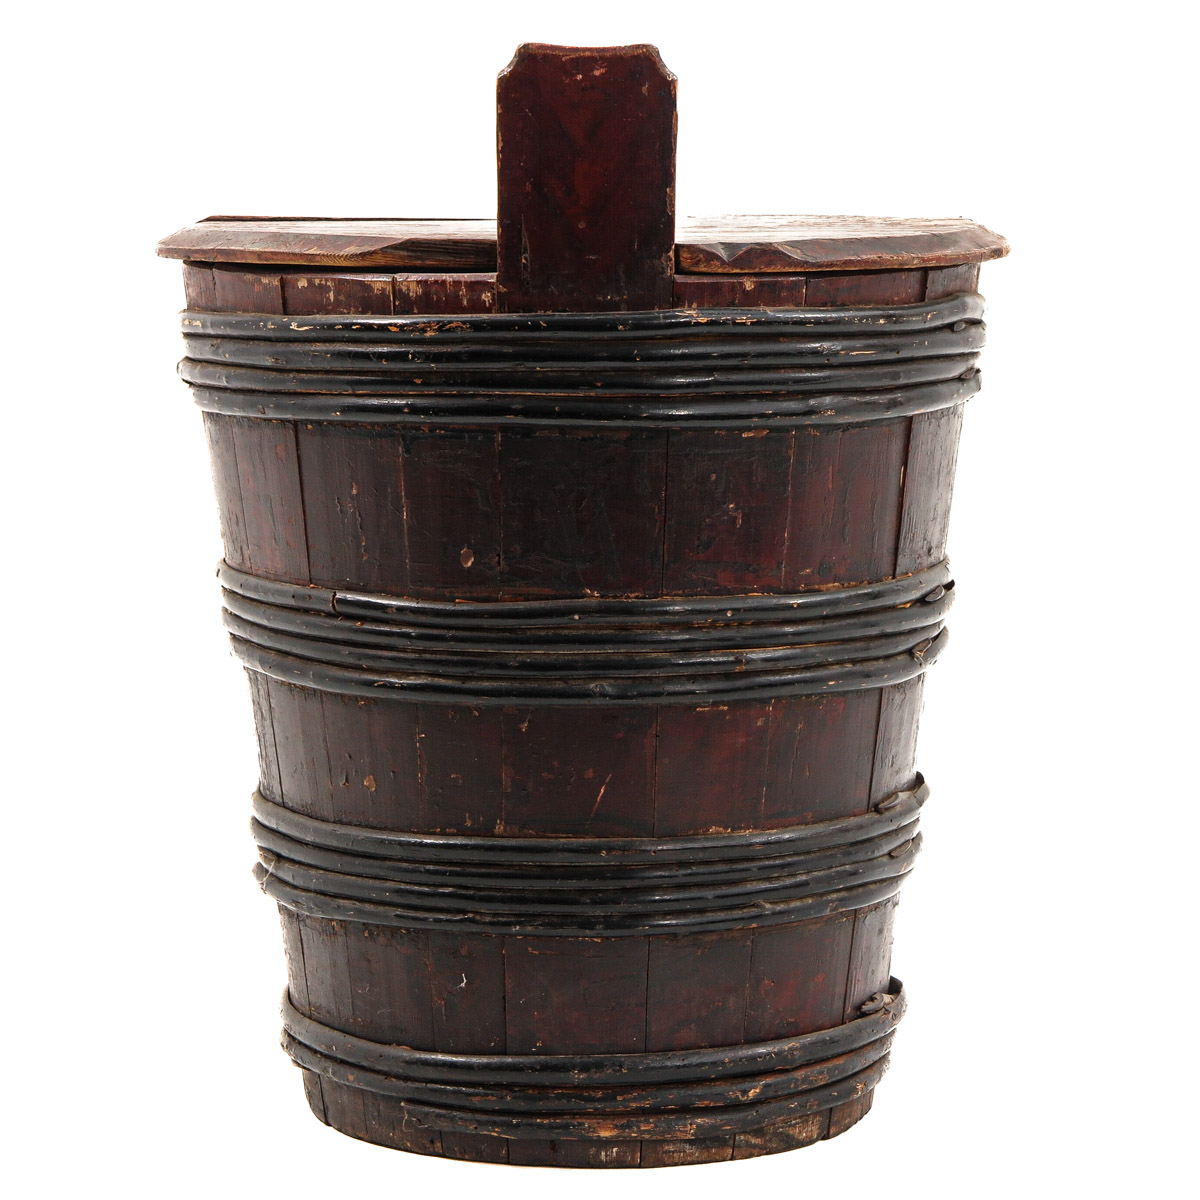 An 18th Century Butter Barrel - Image 2 of 10